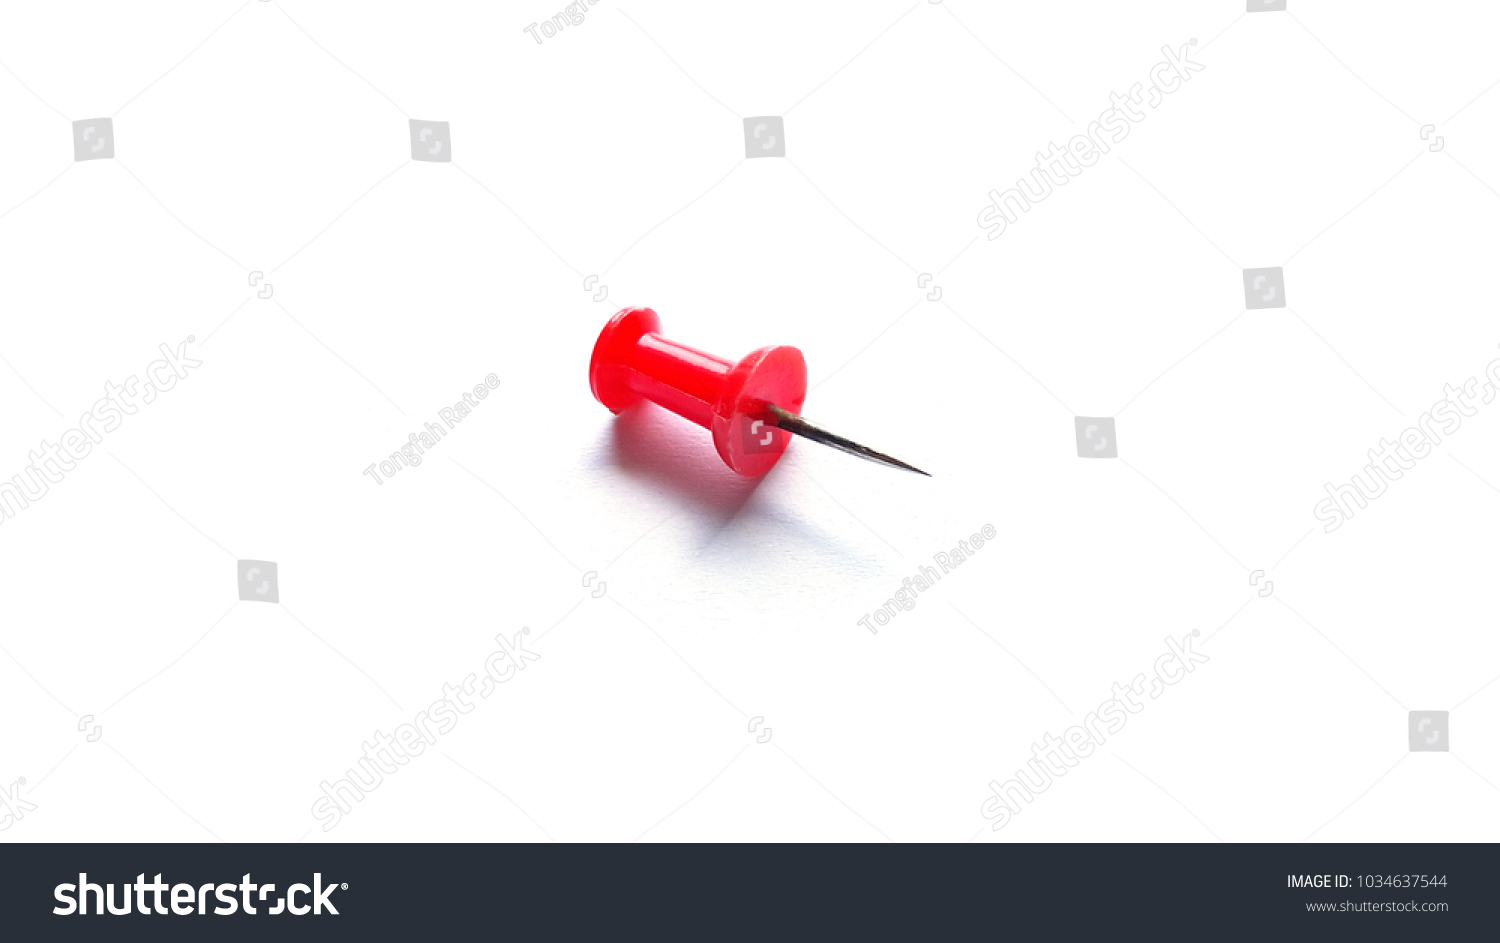 Red push pin isolated on white background #1034637544